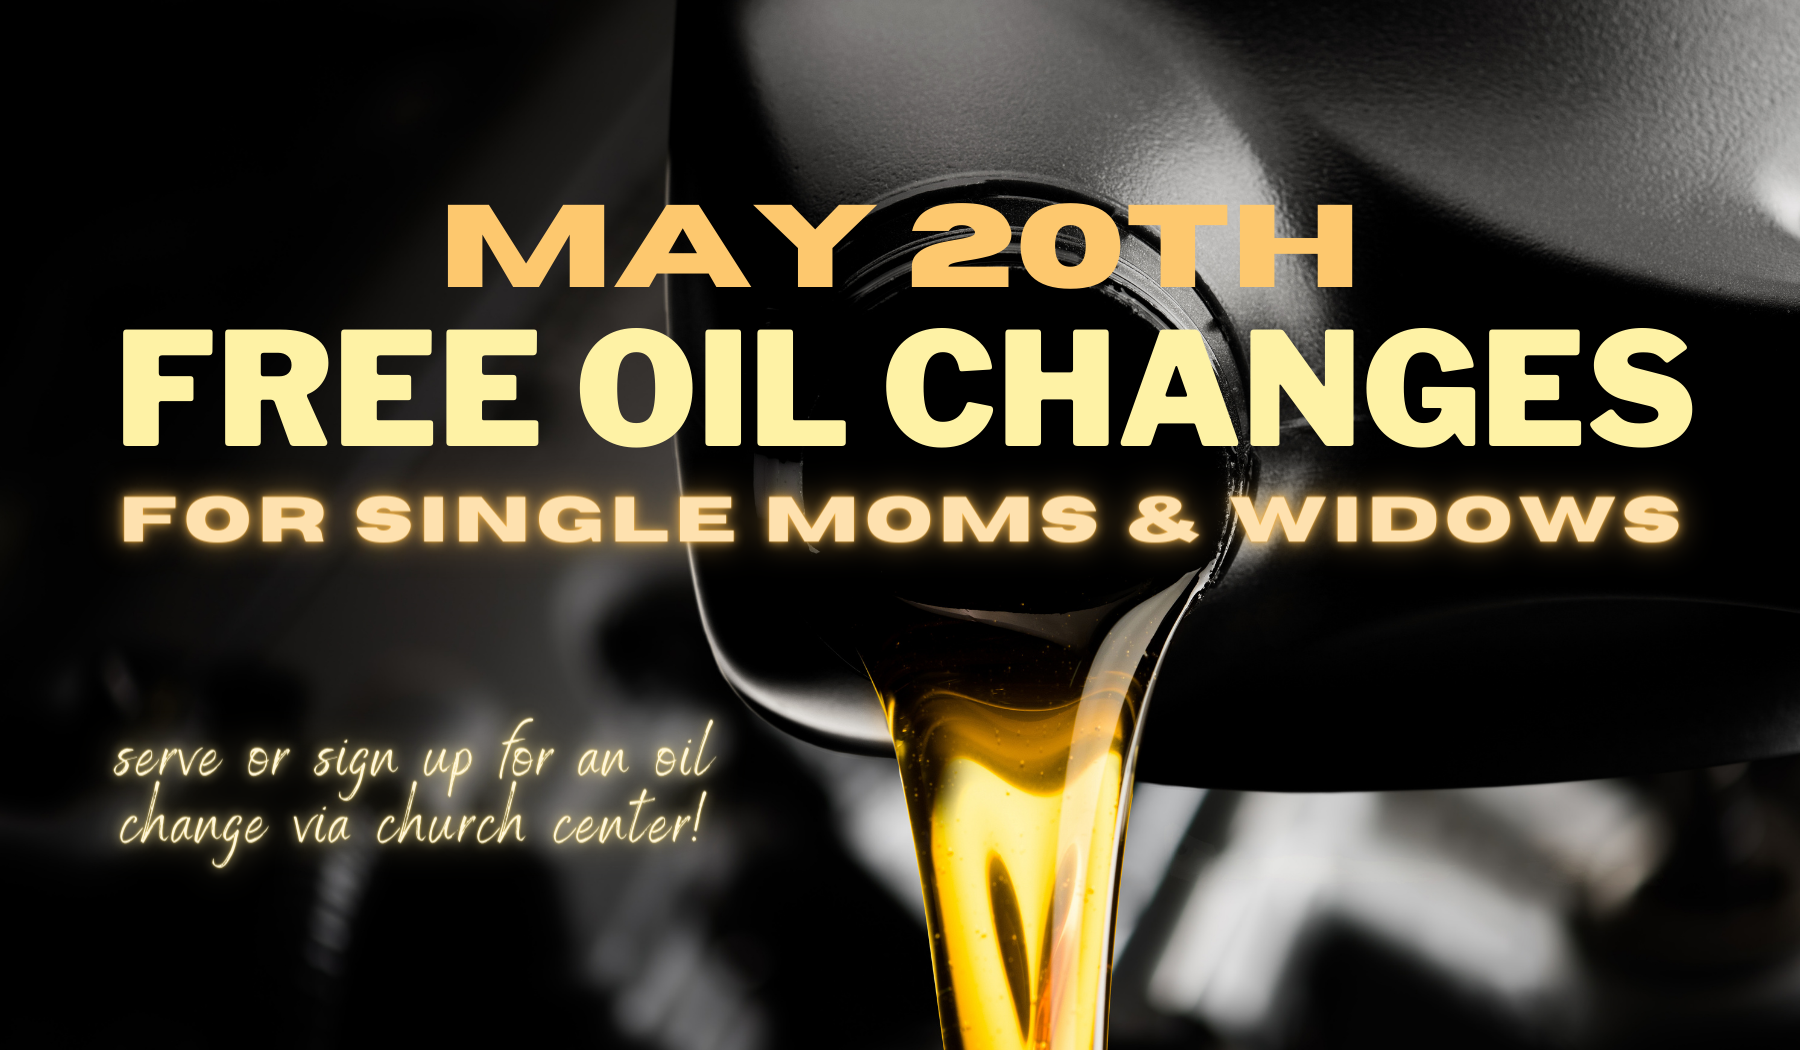 FREE OIL CHANGES